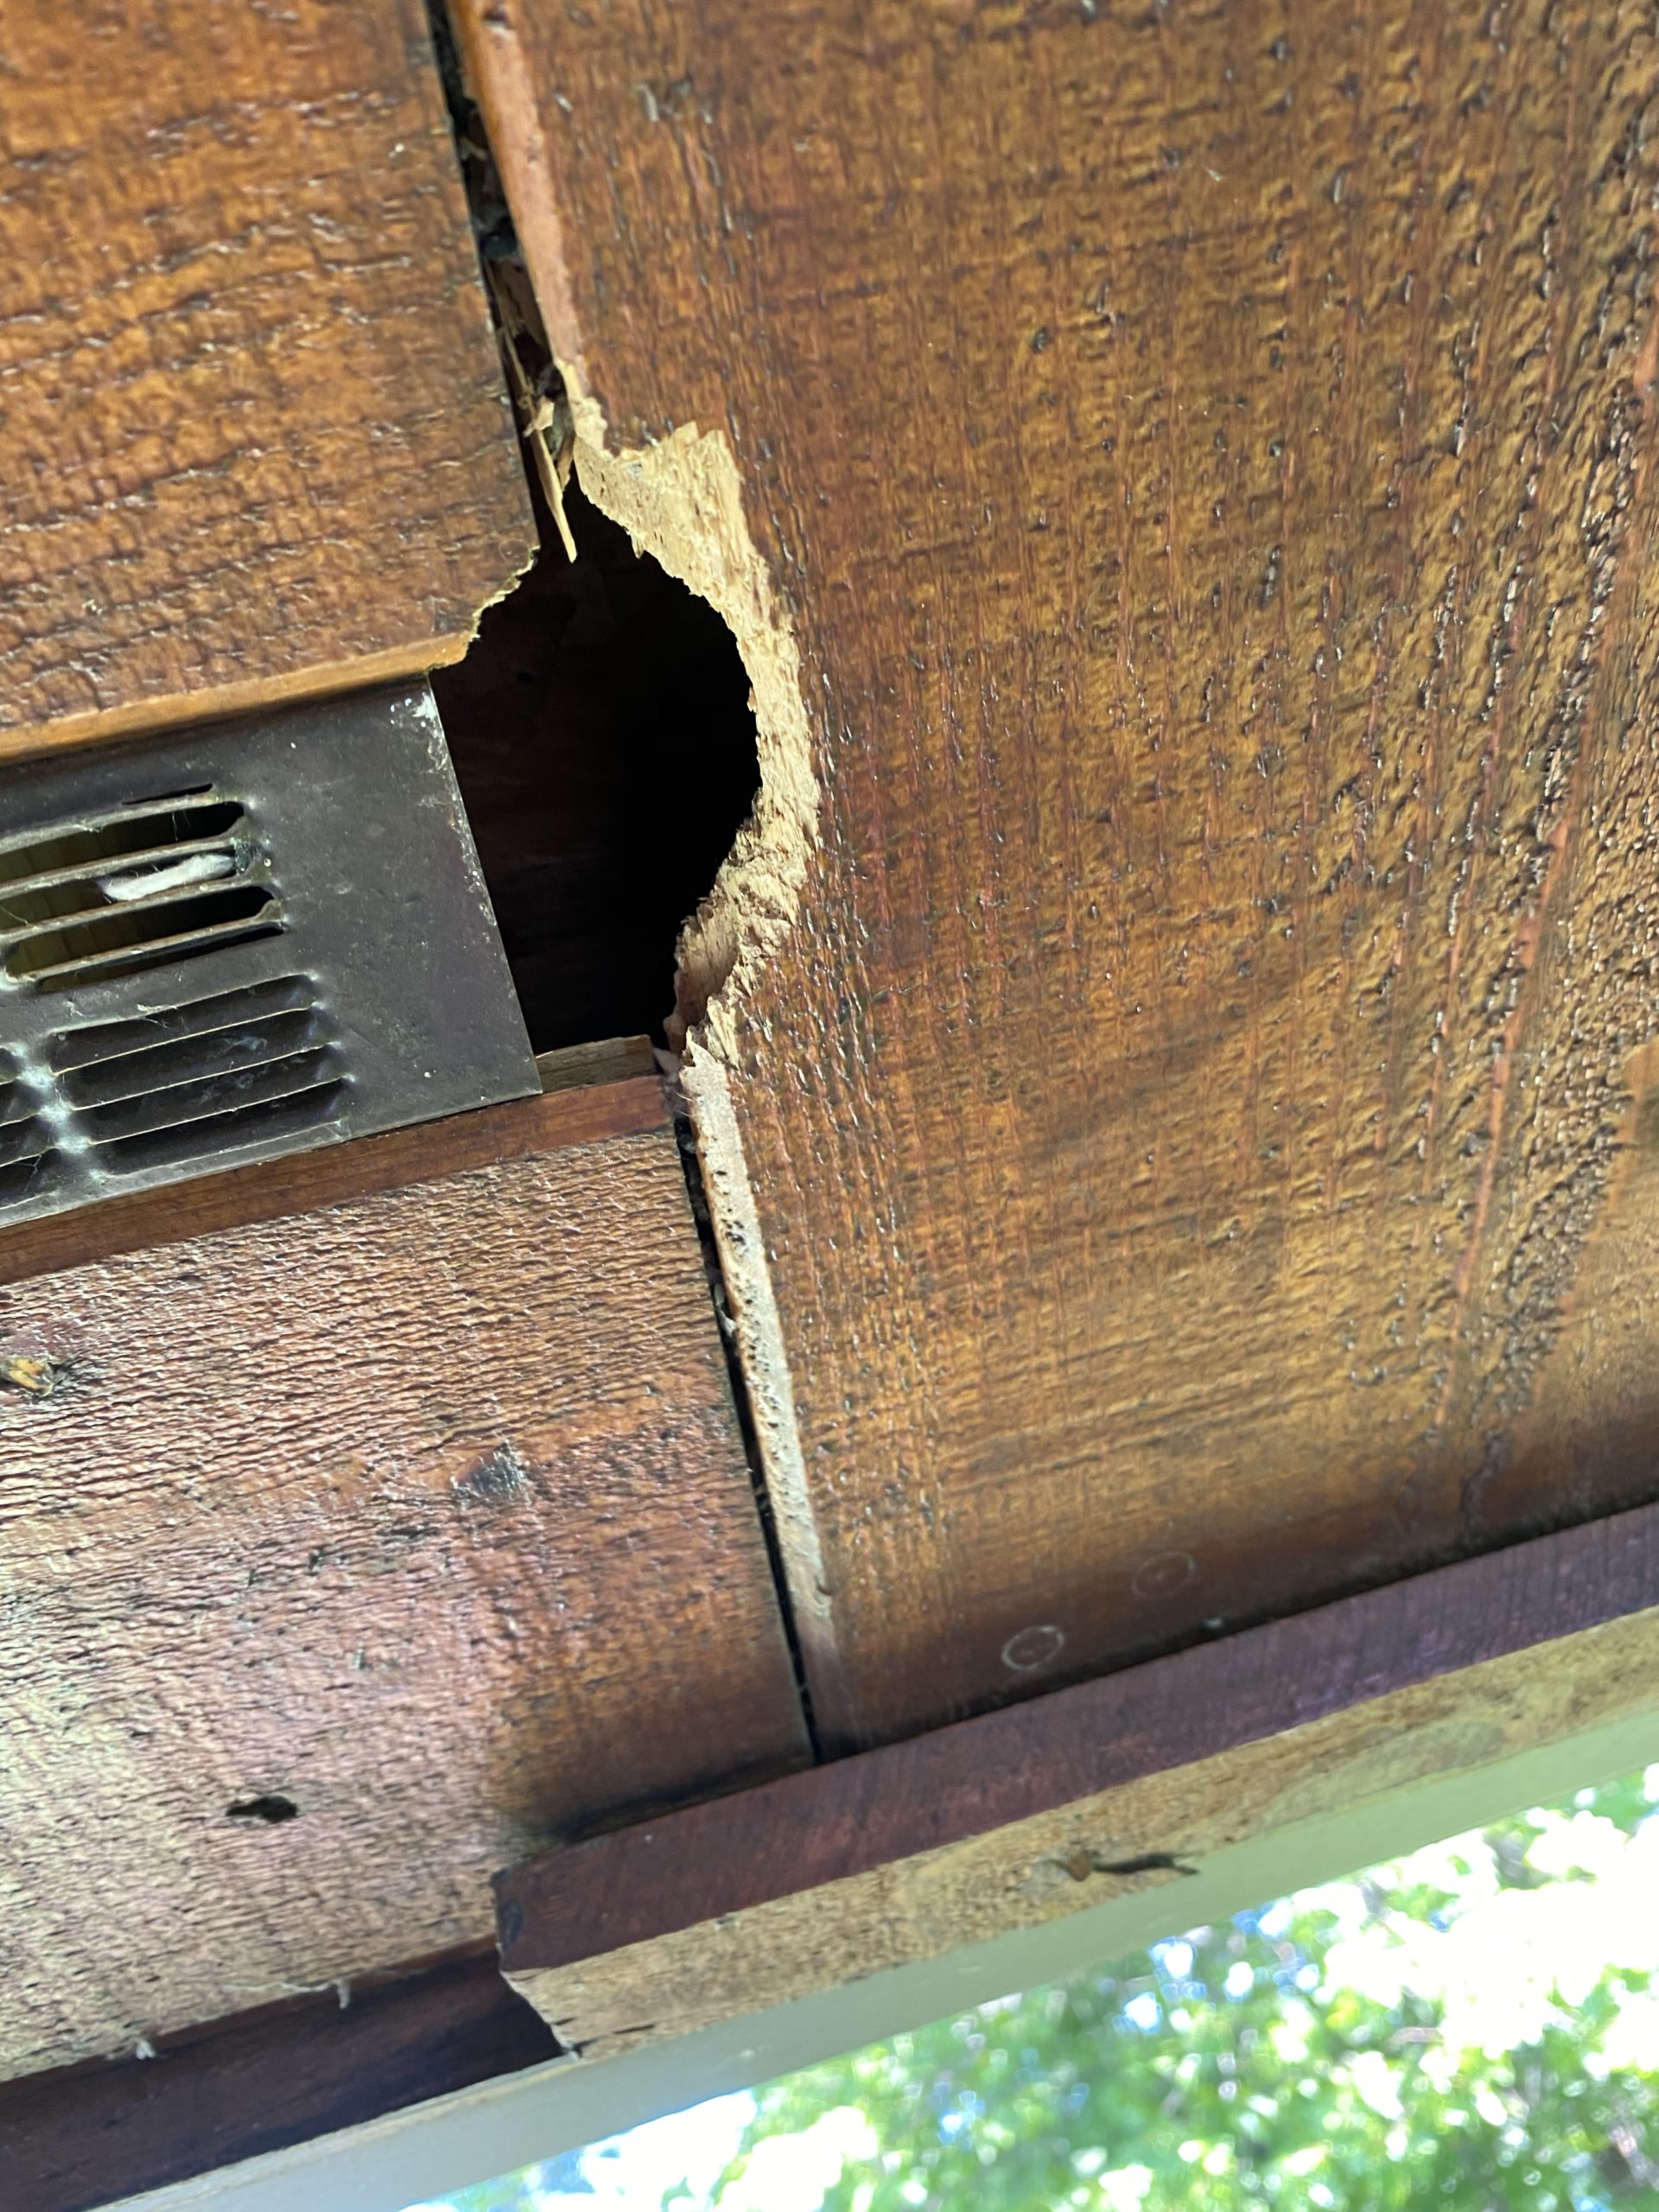 An opening and possible entry point for bats next to a vent.